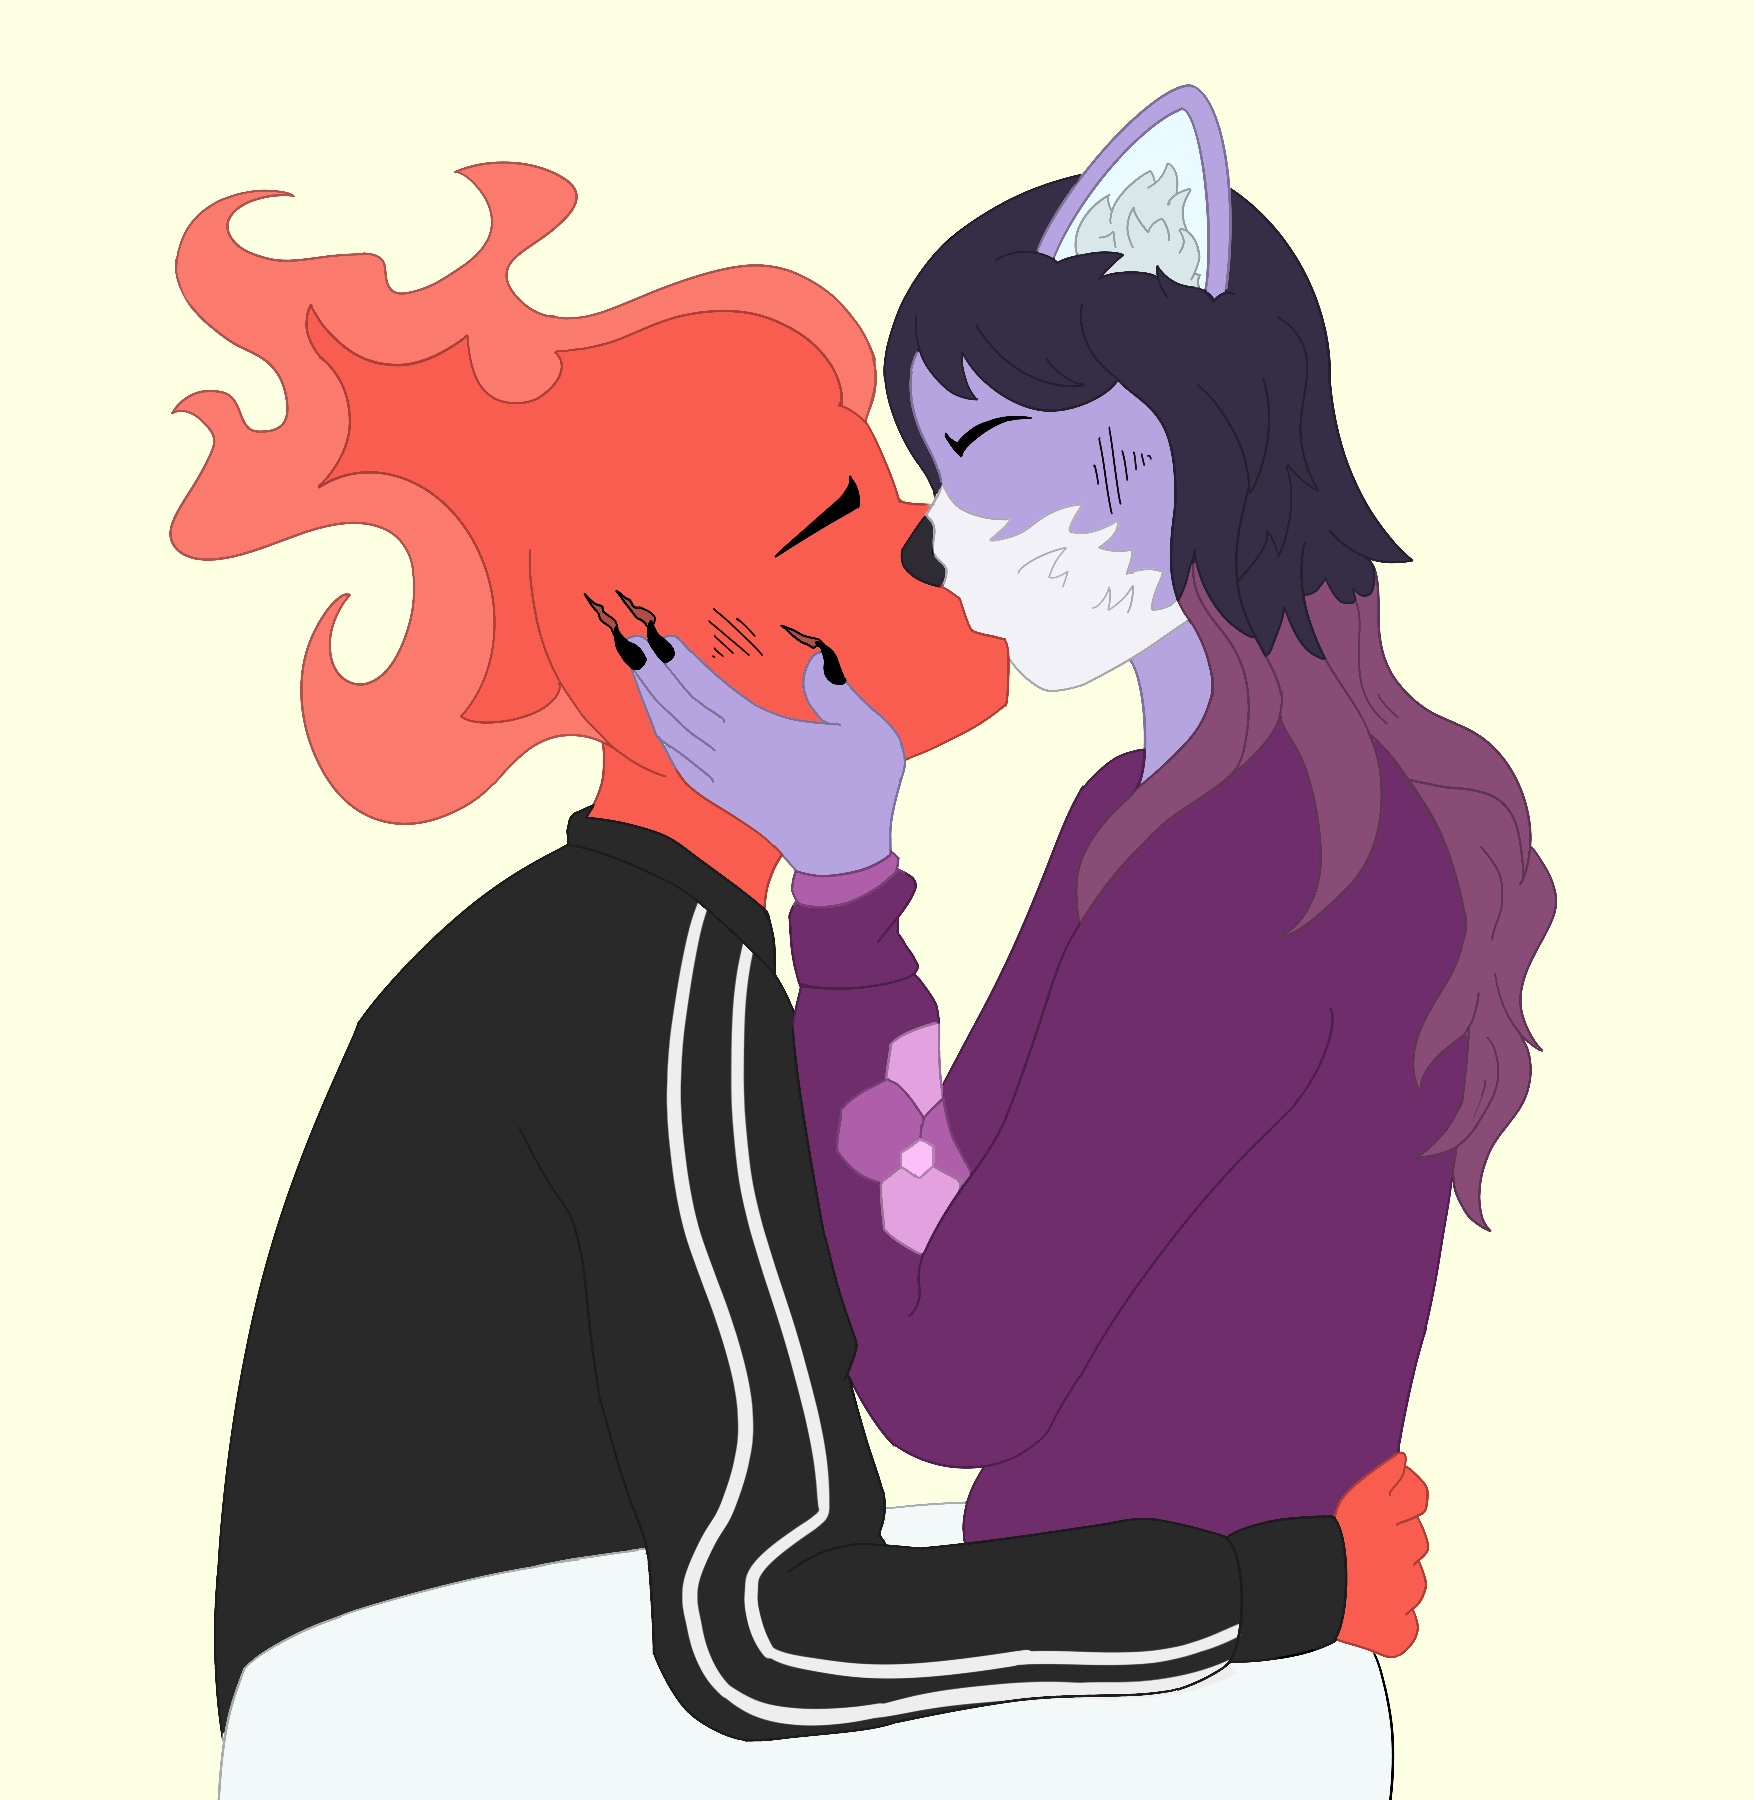 a red fire person in an adidas tracksuit, embrasing my fursona in a purple sweater with a hexagonal pattern on the sleeve. they are kissing